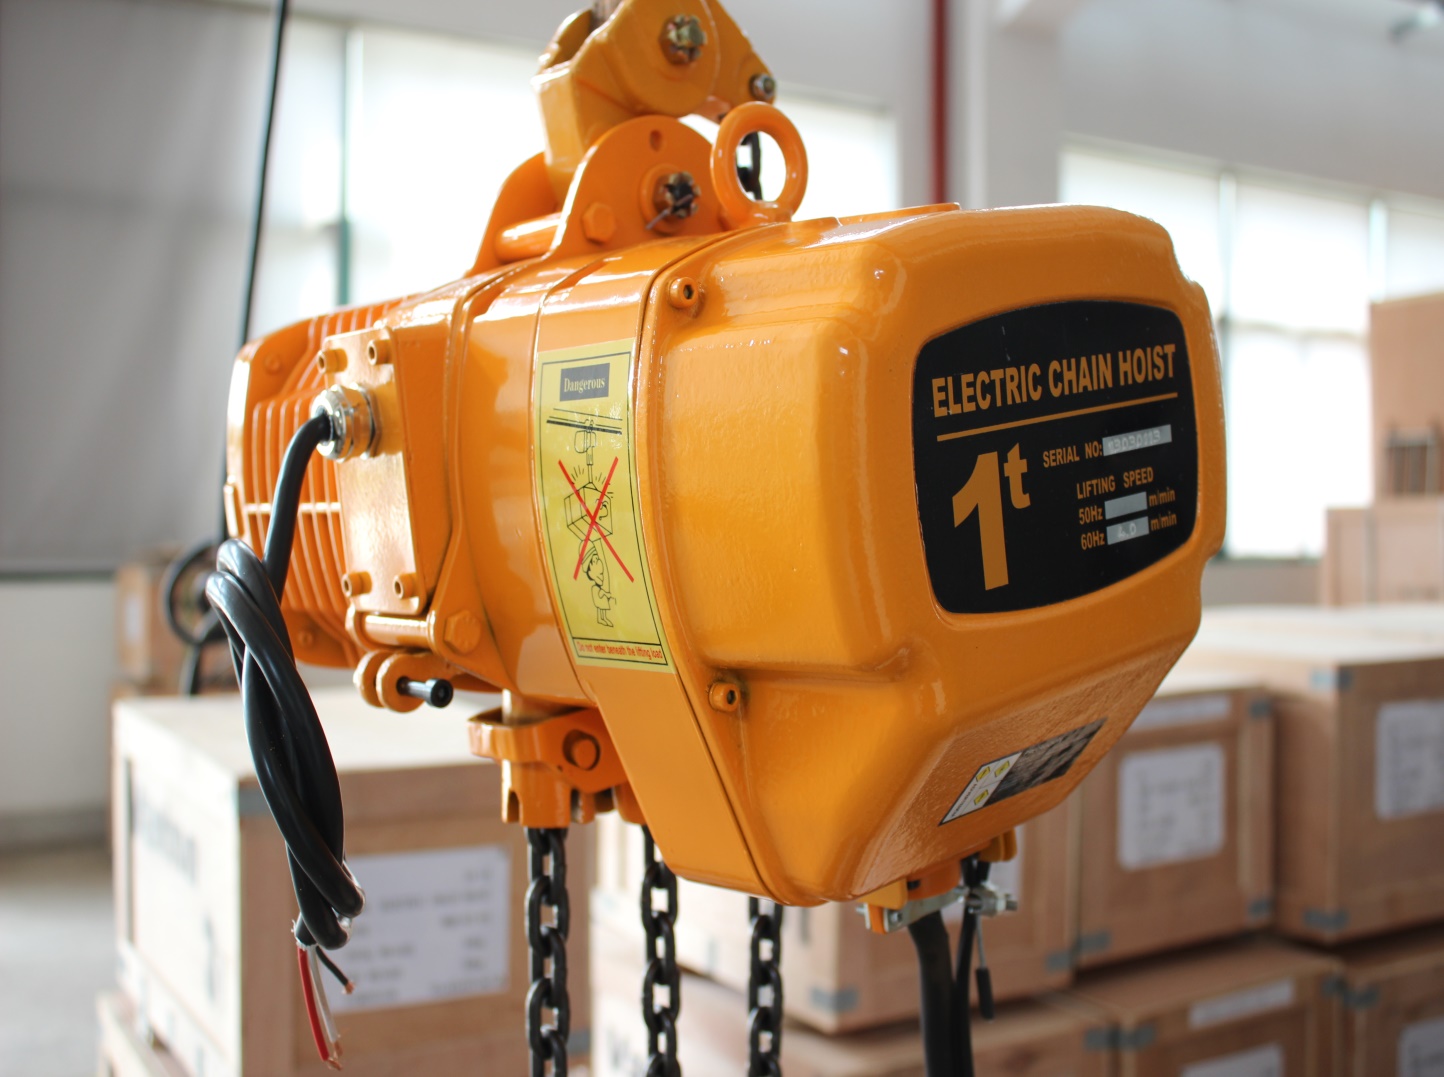 Professional Supplier of RM Electric Chain Hoists12-9.jpg